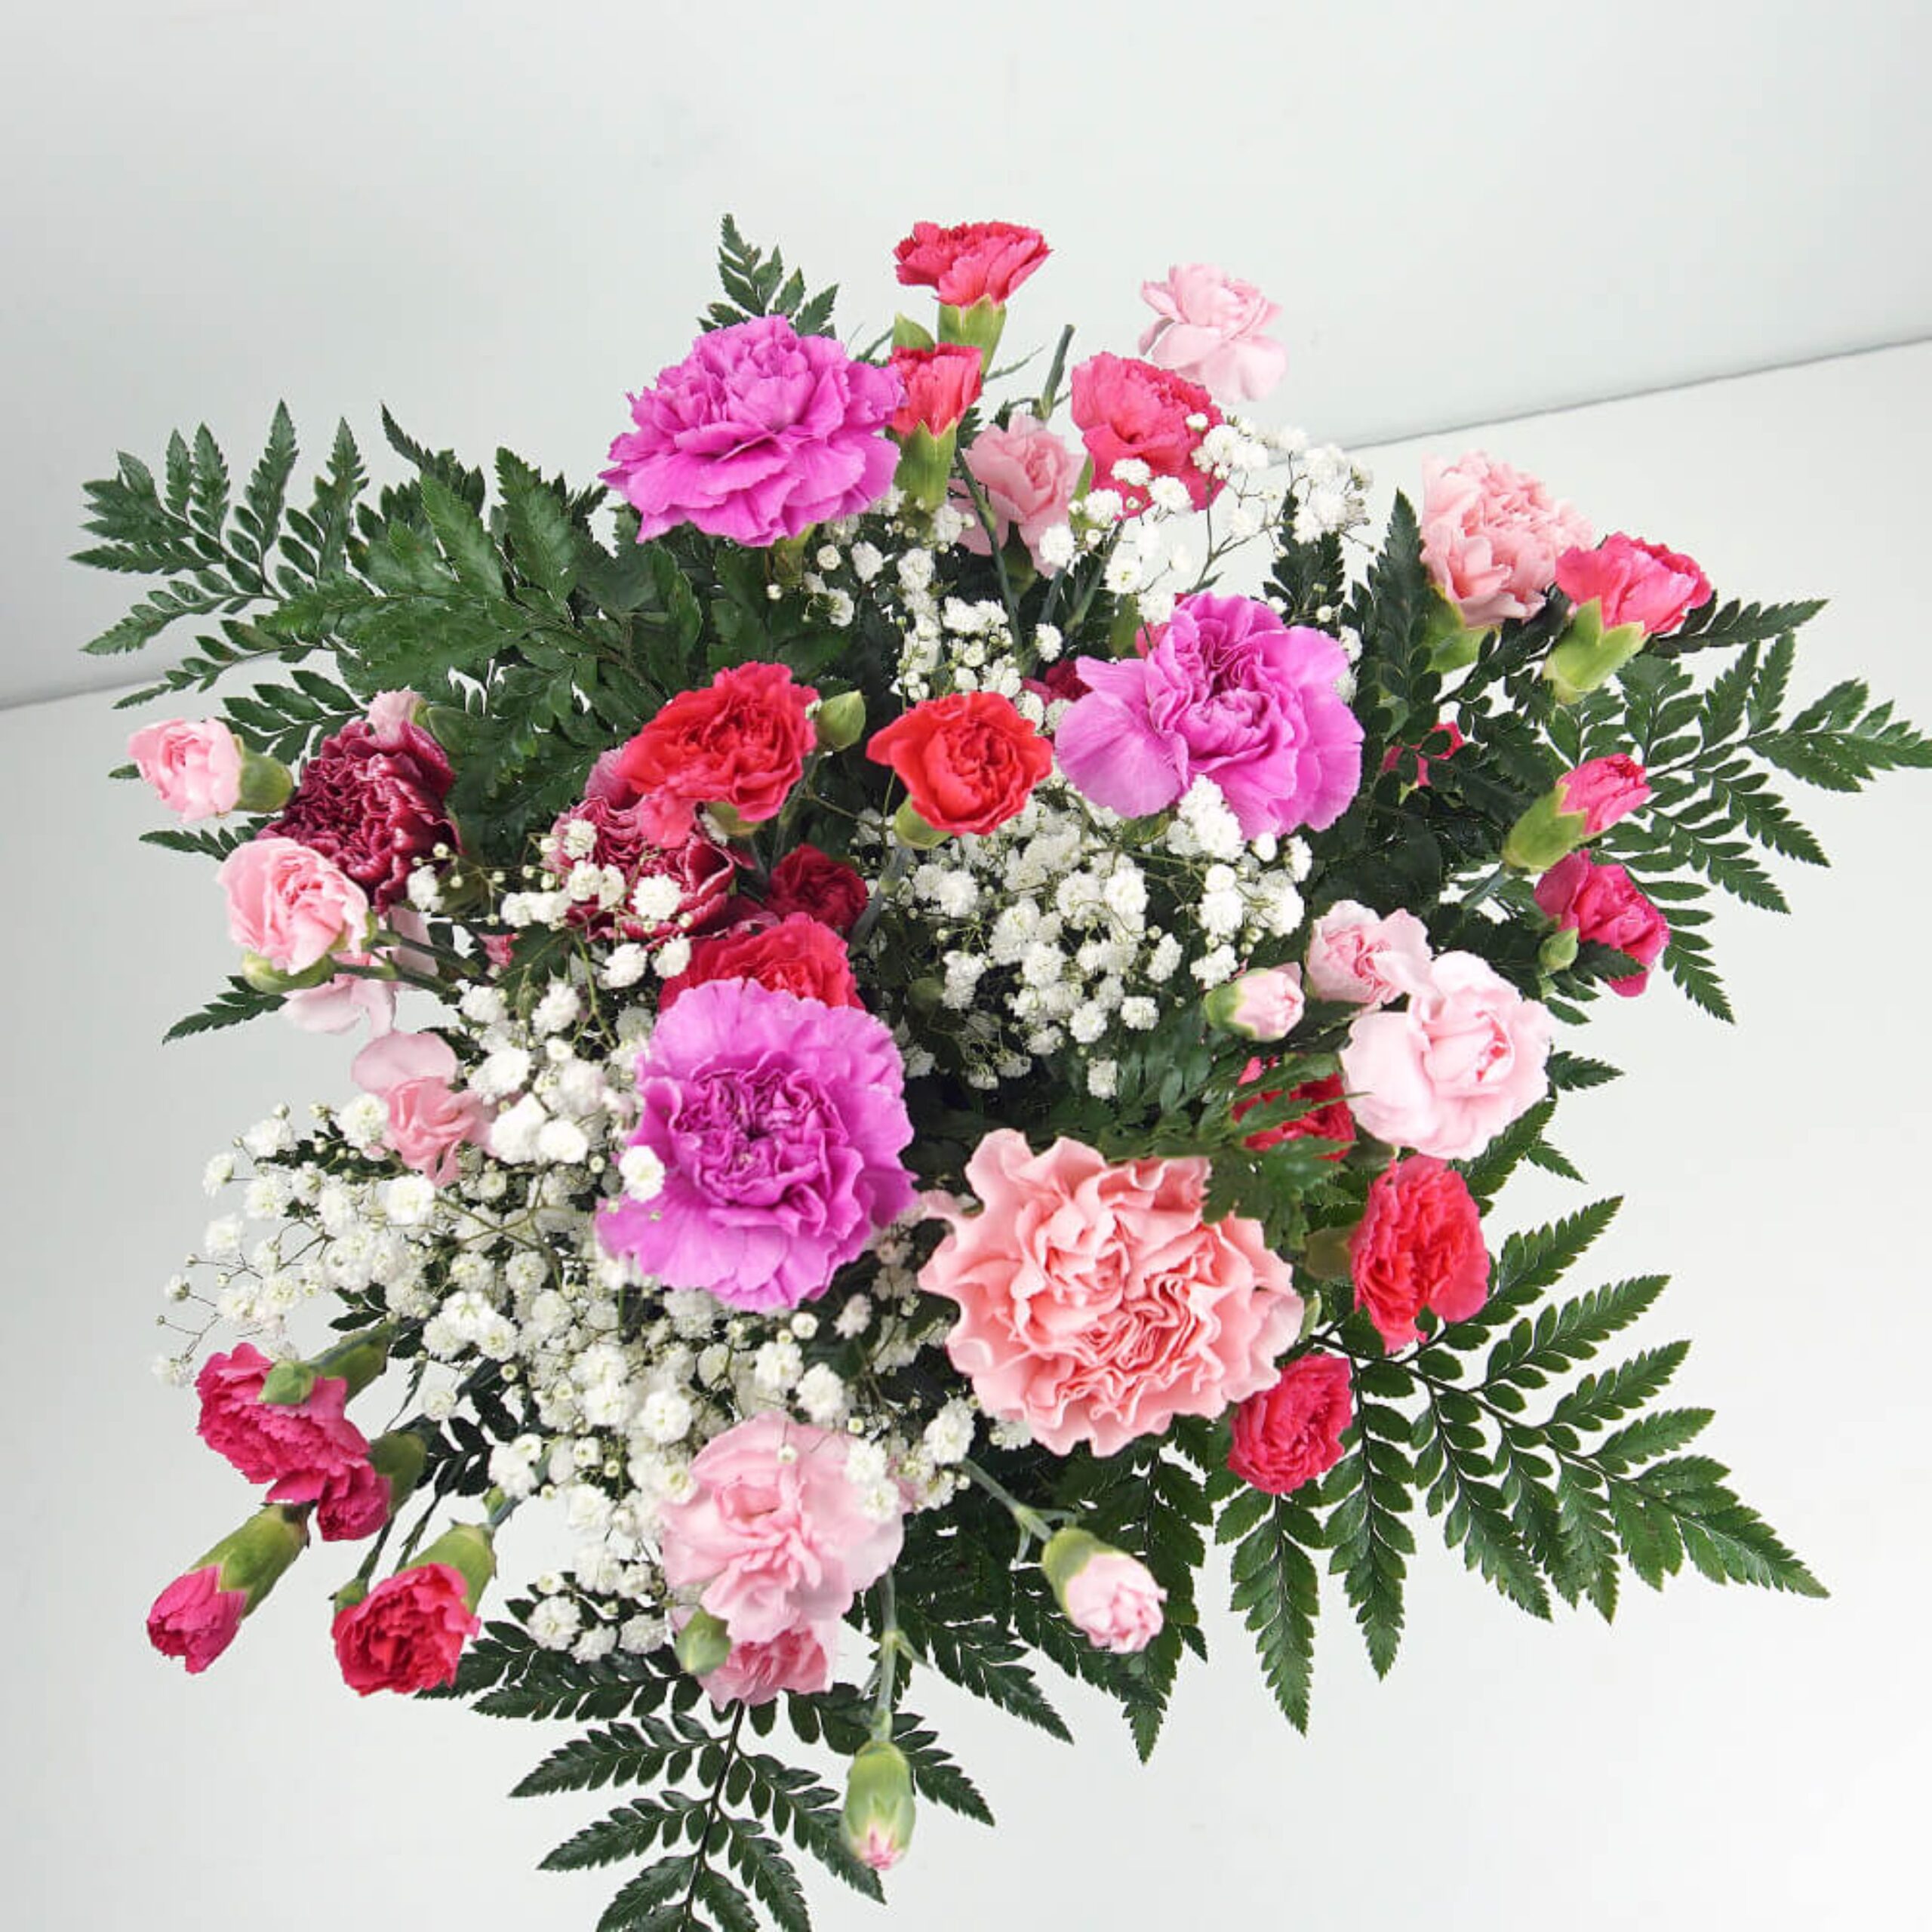 Carnations Carnations: Types,